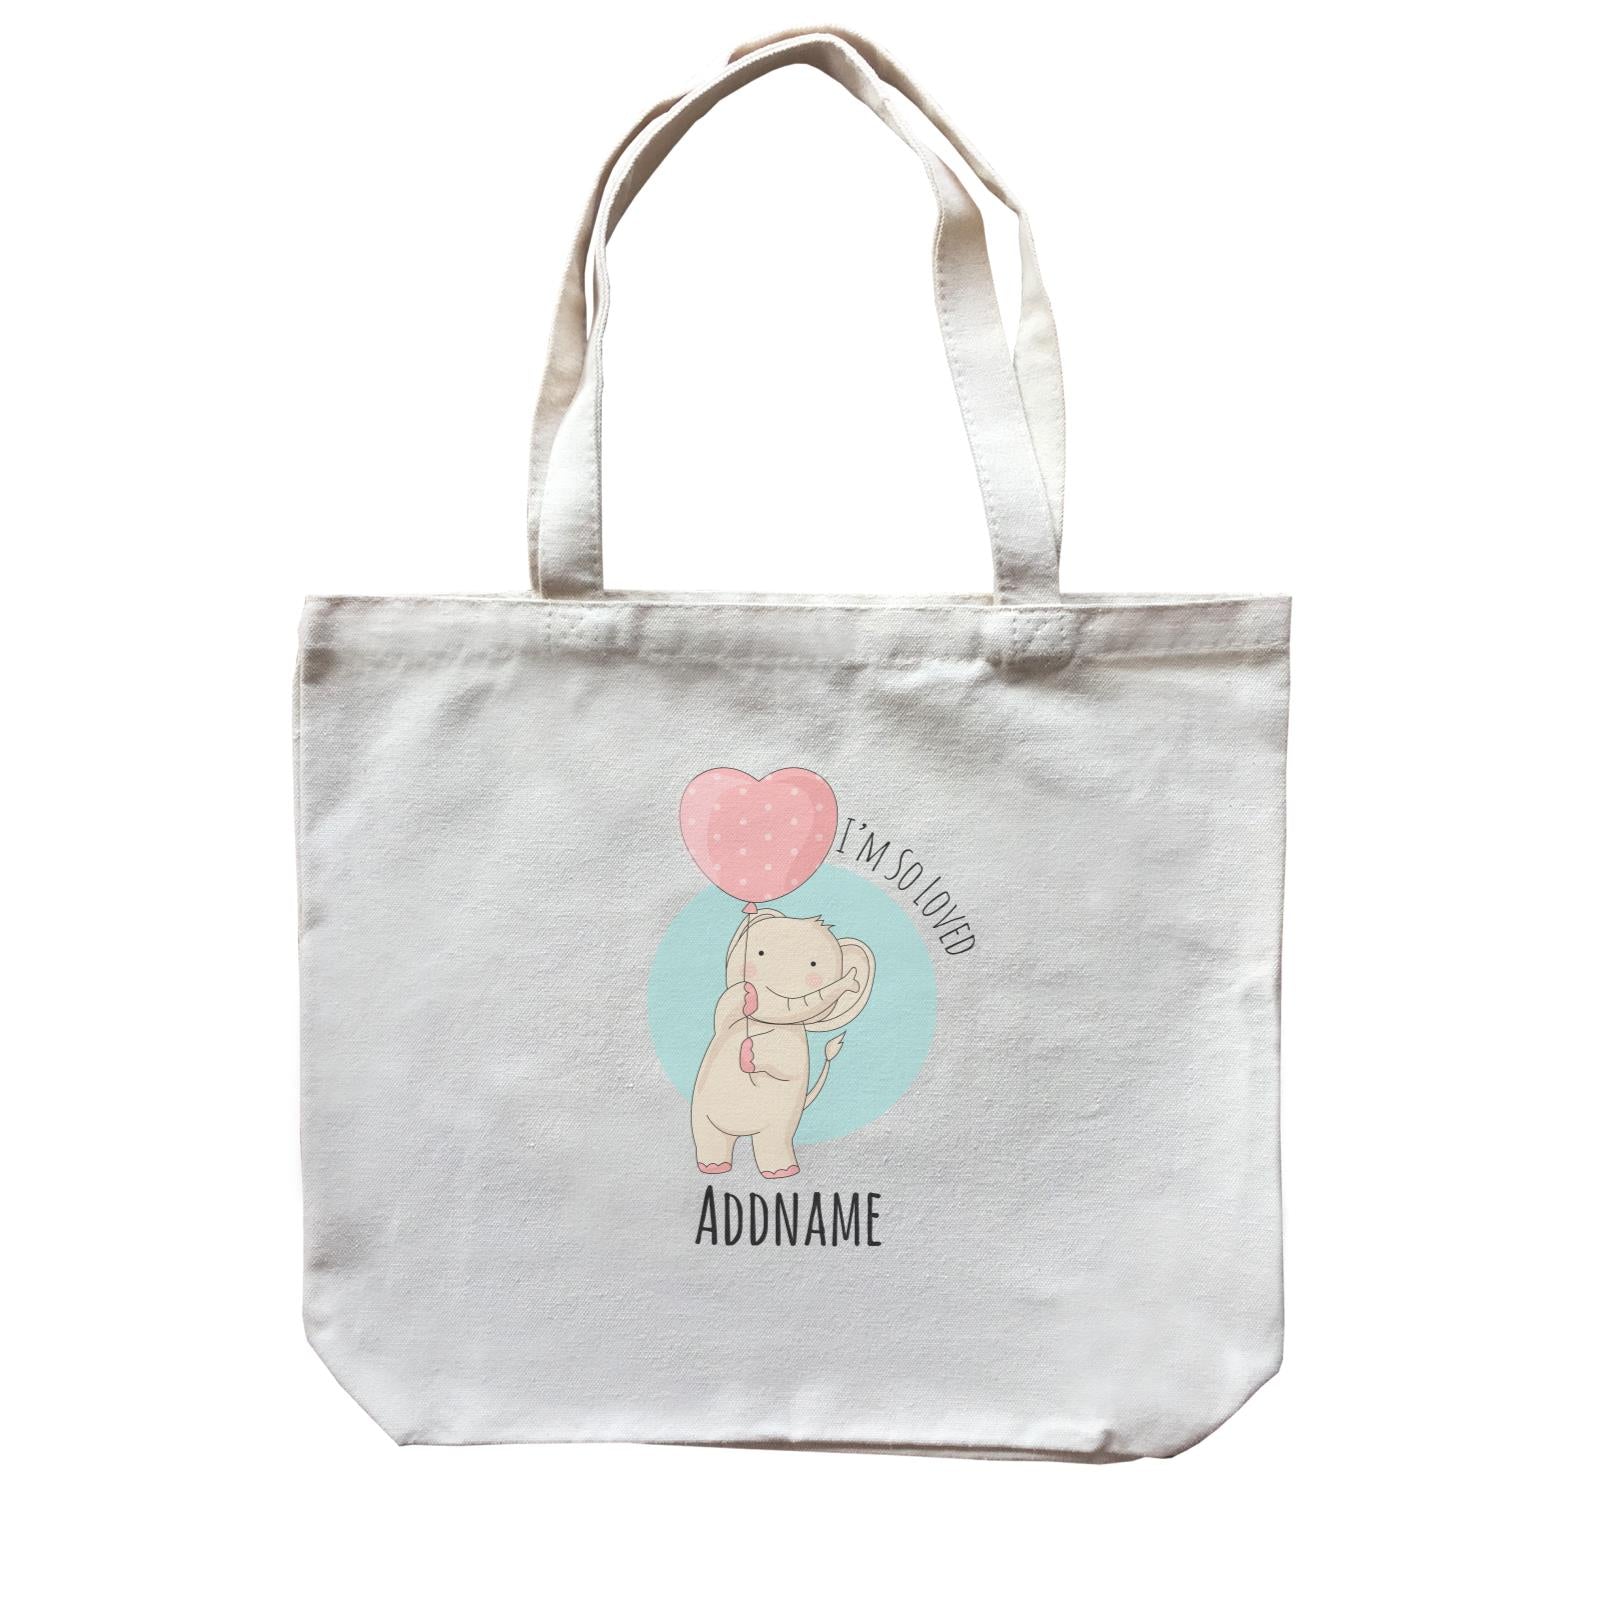 Sweet Animals Sketches Elephant with Balloon I'm So Loved Addname Canvas Bag